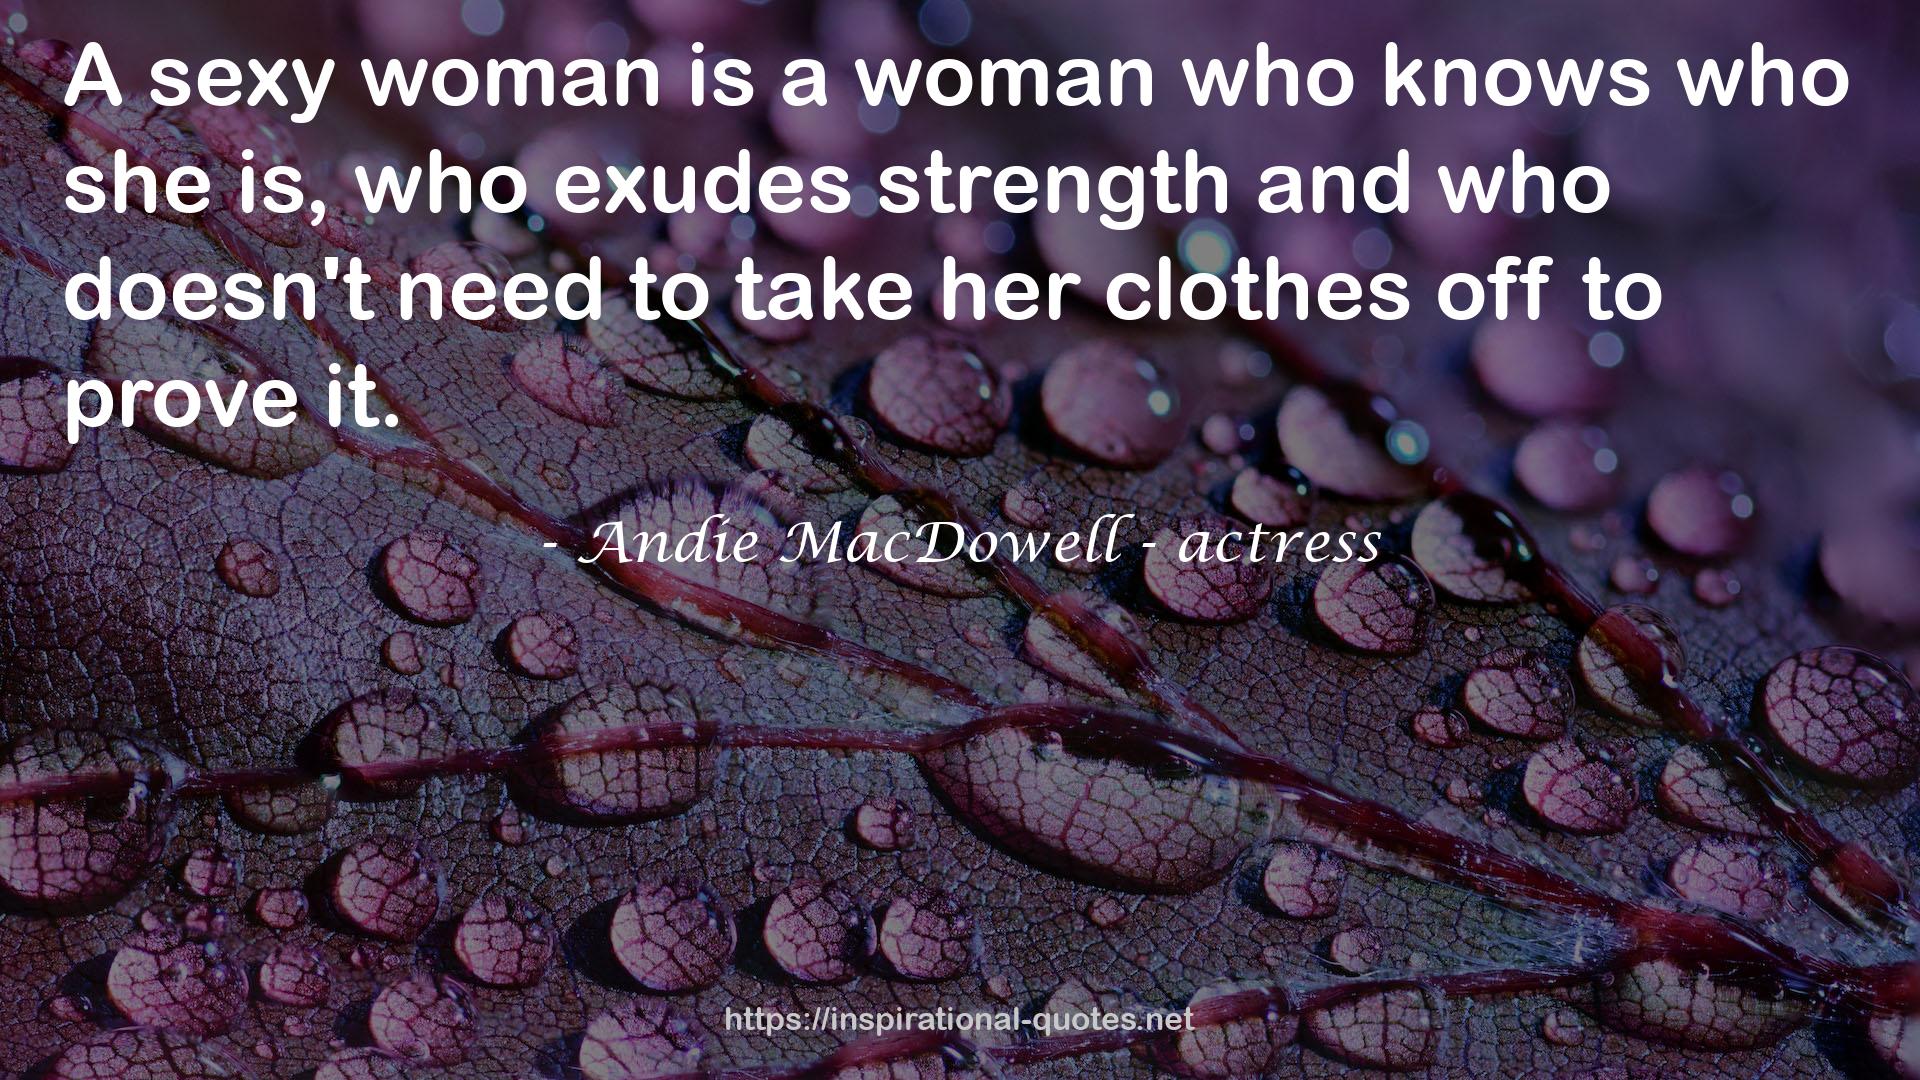 Andie MacDowell - actress QUOTES